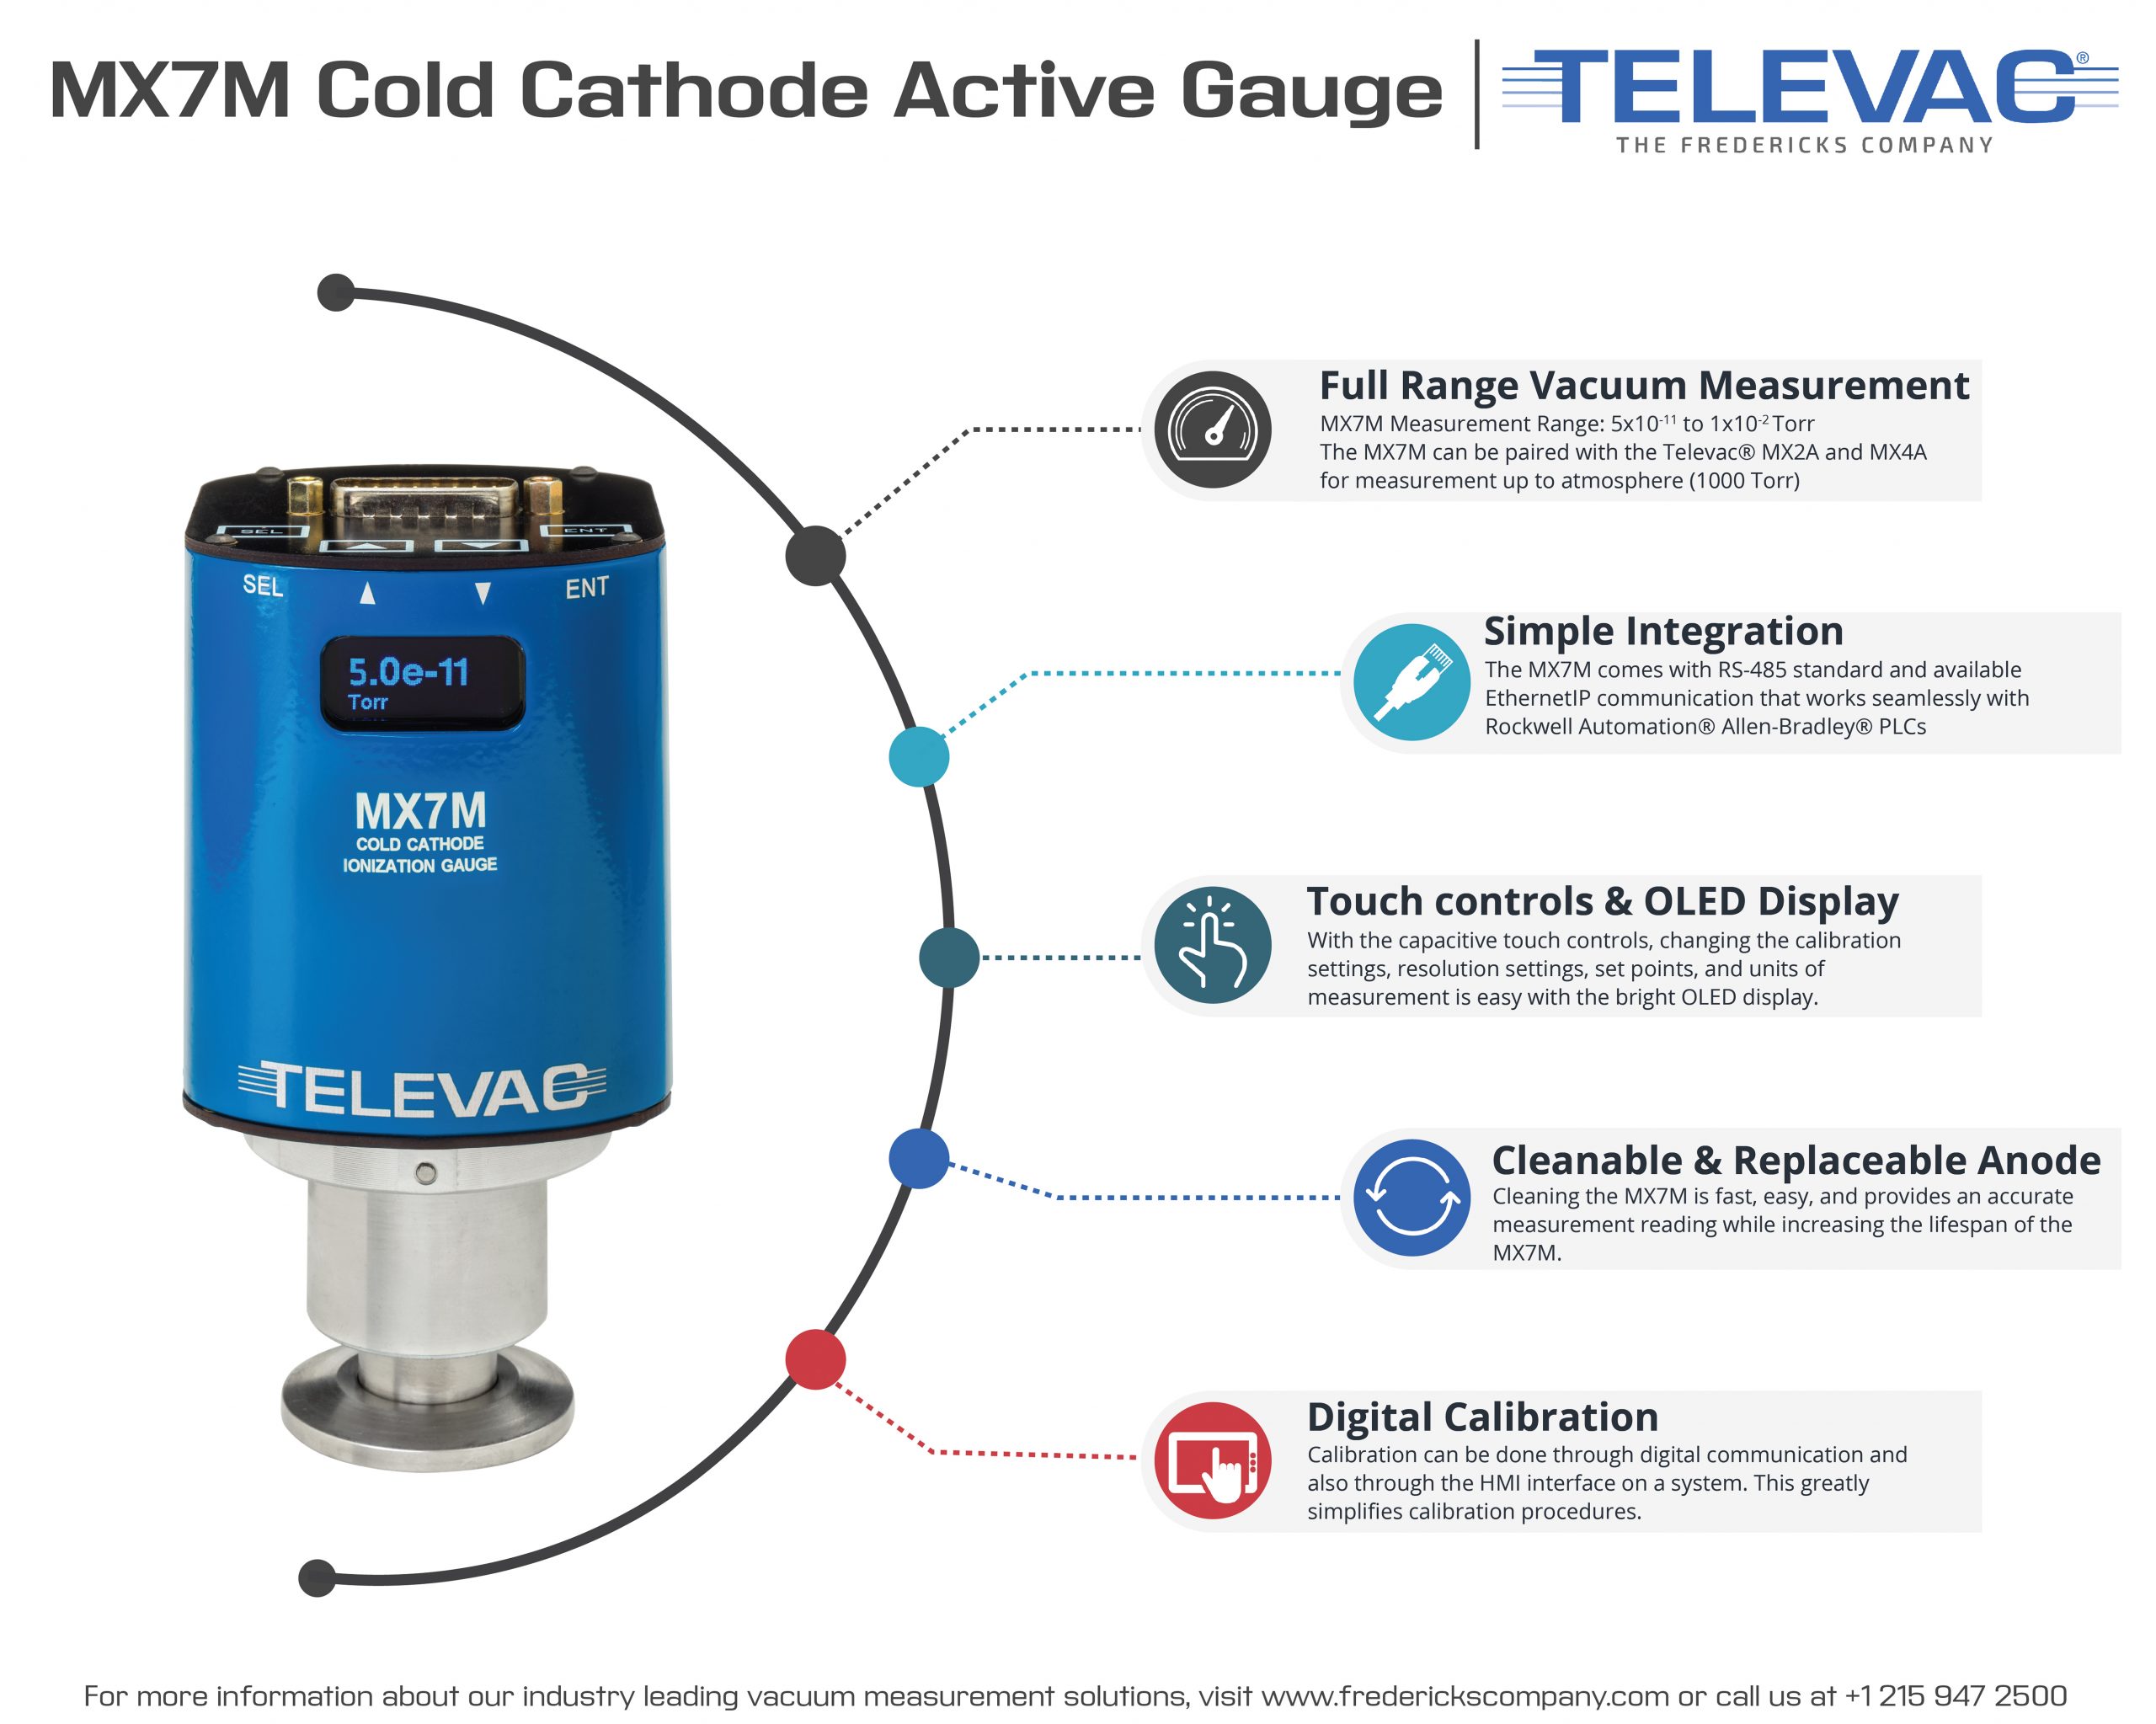 Features and benefits infographic for the Televac®️ MX7M Cold Cathode Active Vacuum Gauge.